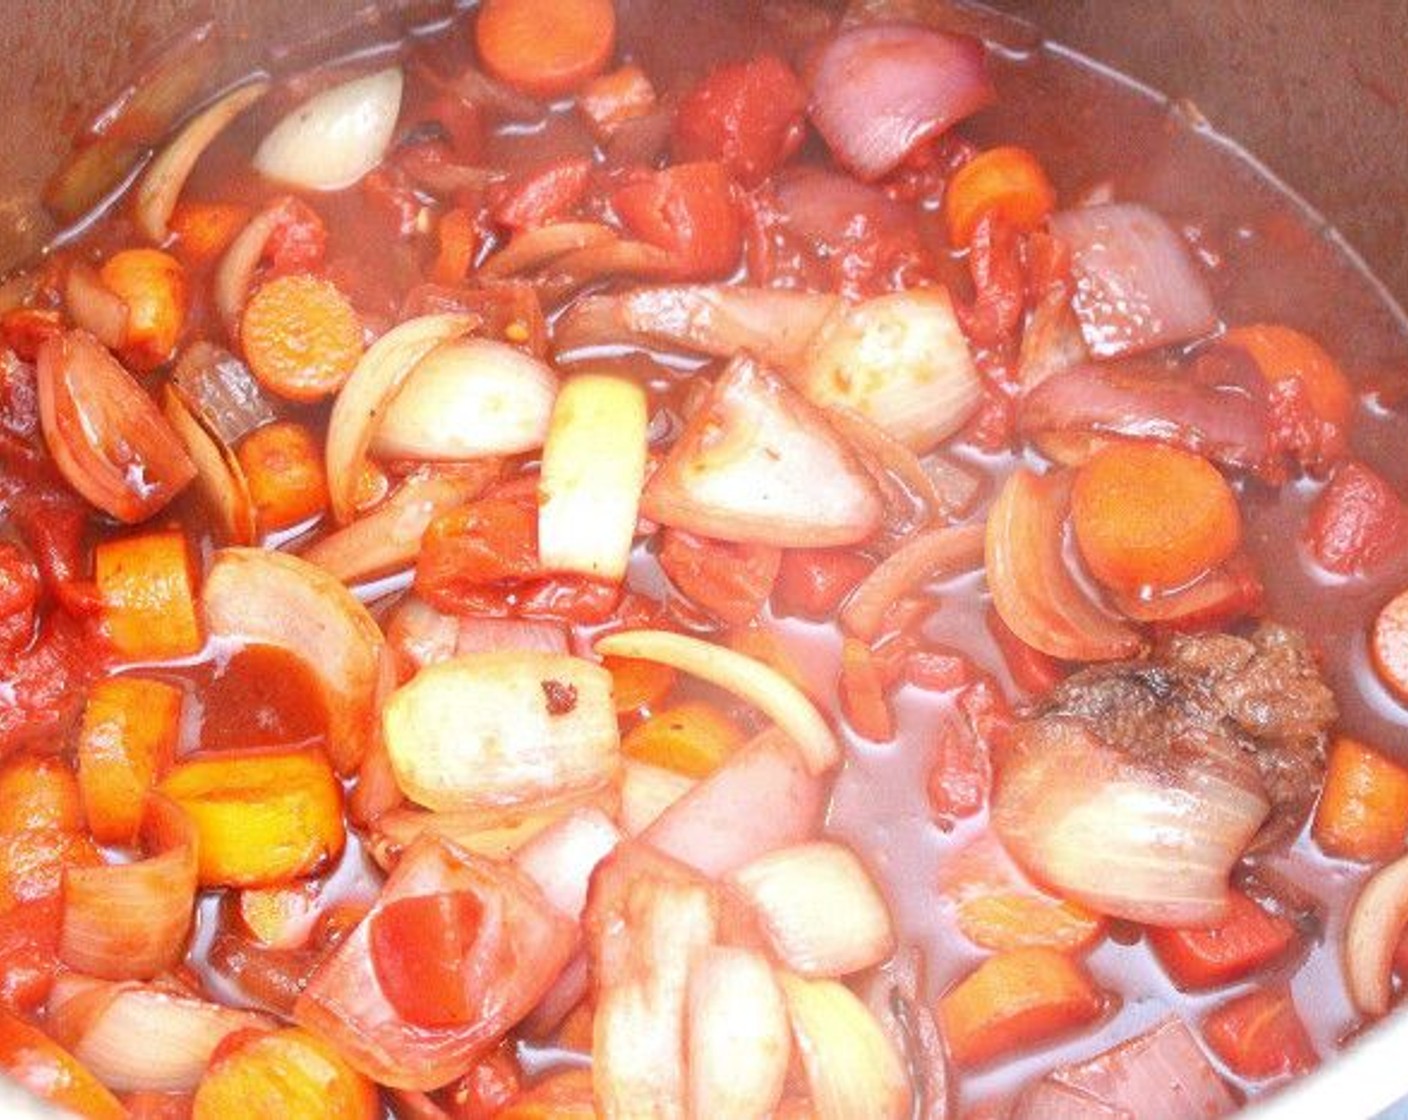 step 2 In the same pot, sauté Carrots (2 cups) and the Onions (2) until lightly caramelized. Add Tomatoes (2 cups), 2 cups of Merlot (2 cups) and Beef Stock (32 fl oz).